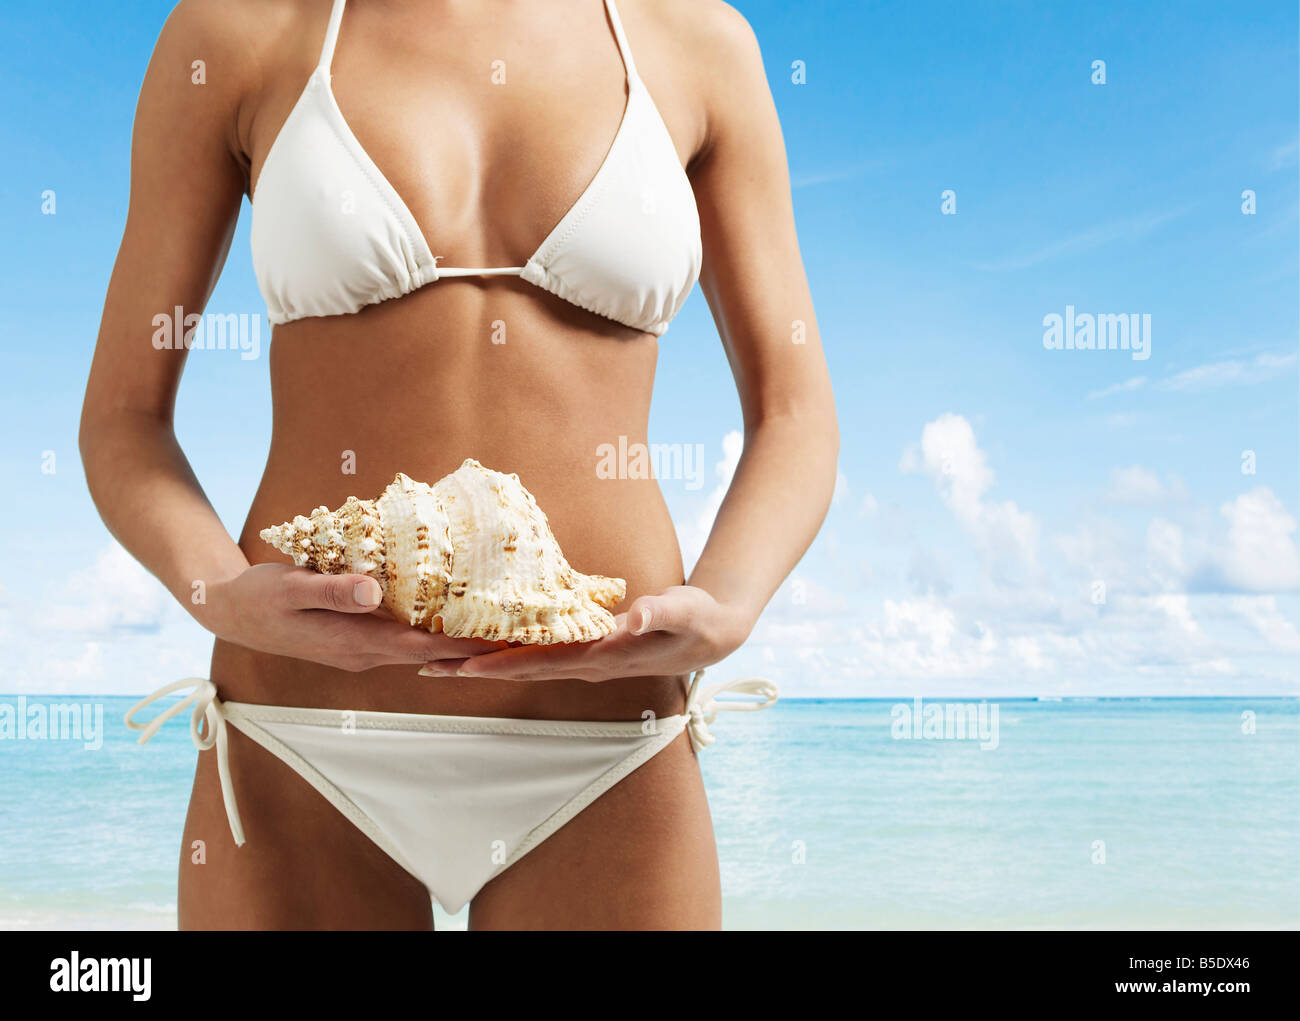 Midsection of Woman with Seashell Stock Photo